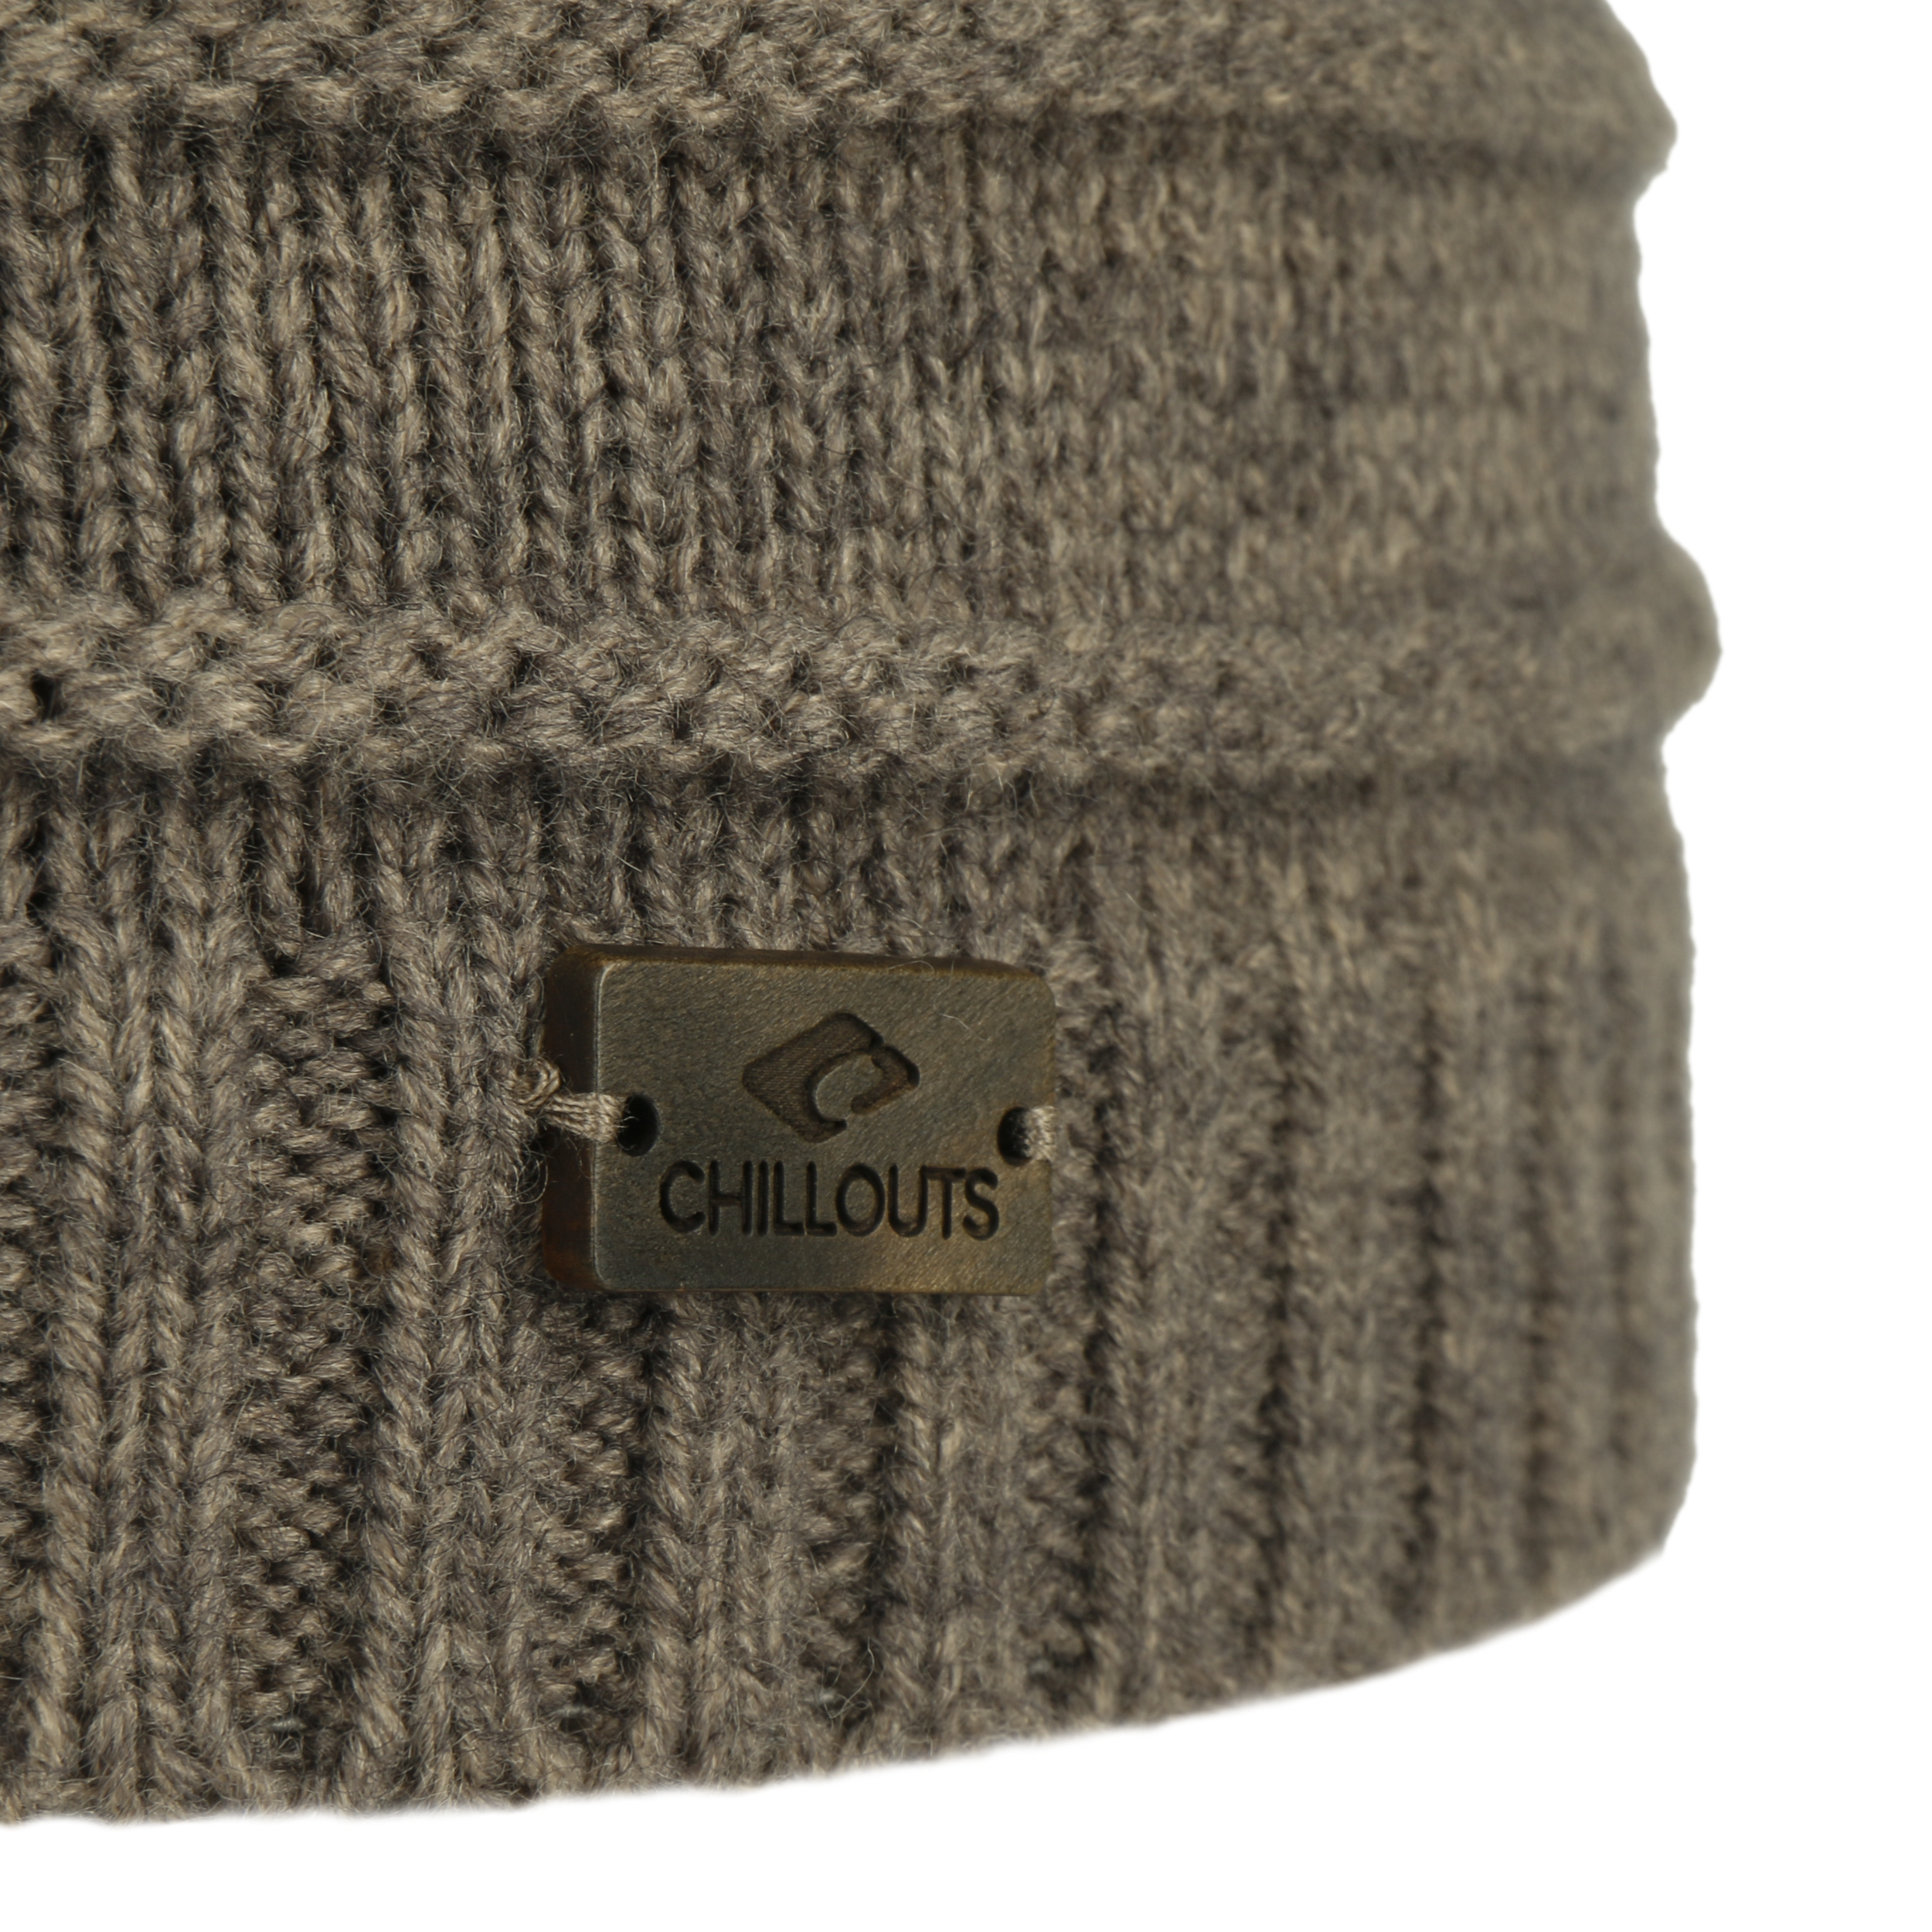 Arne Beanie Hat by Chillouts - 26,95 €